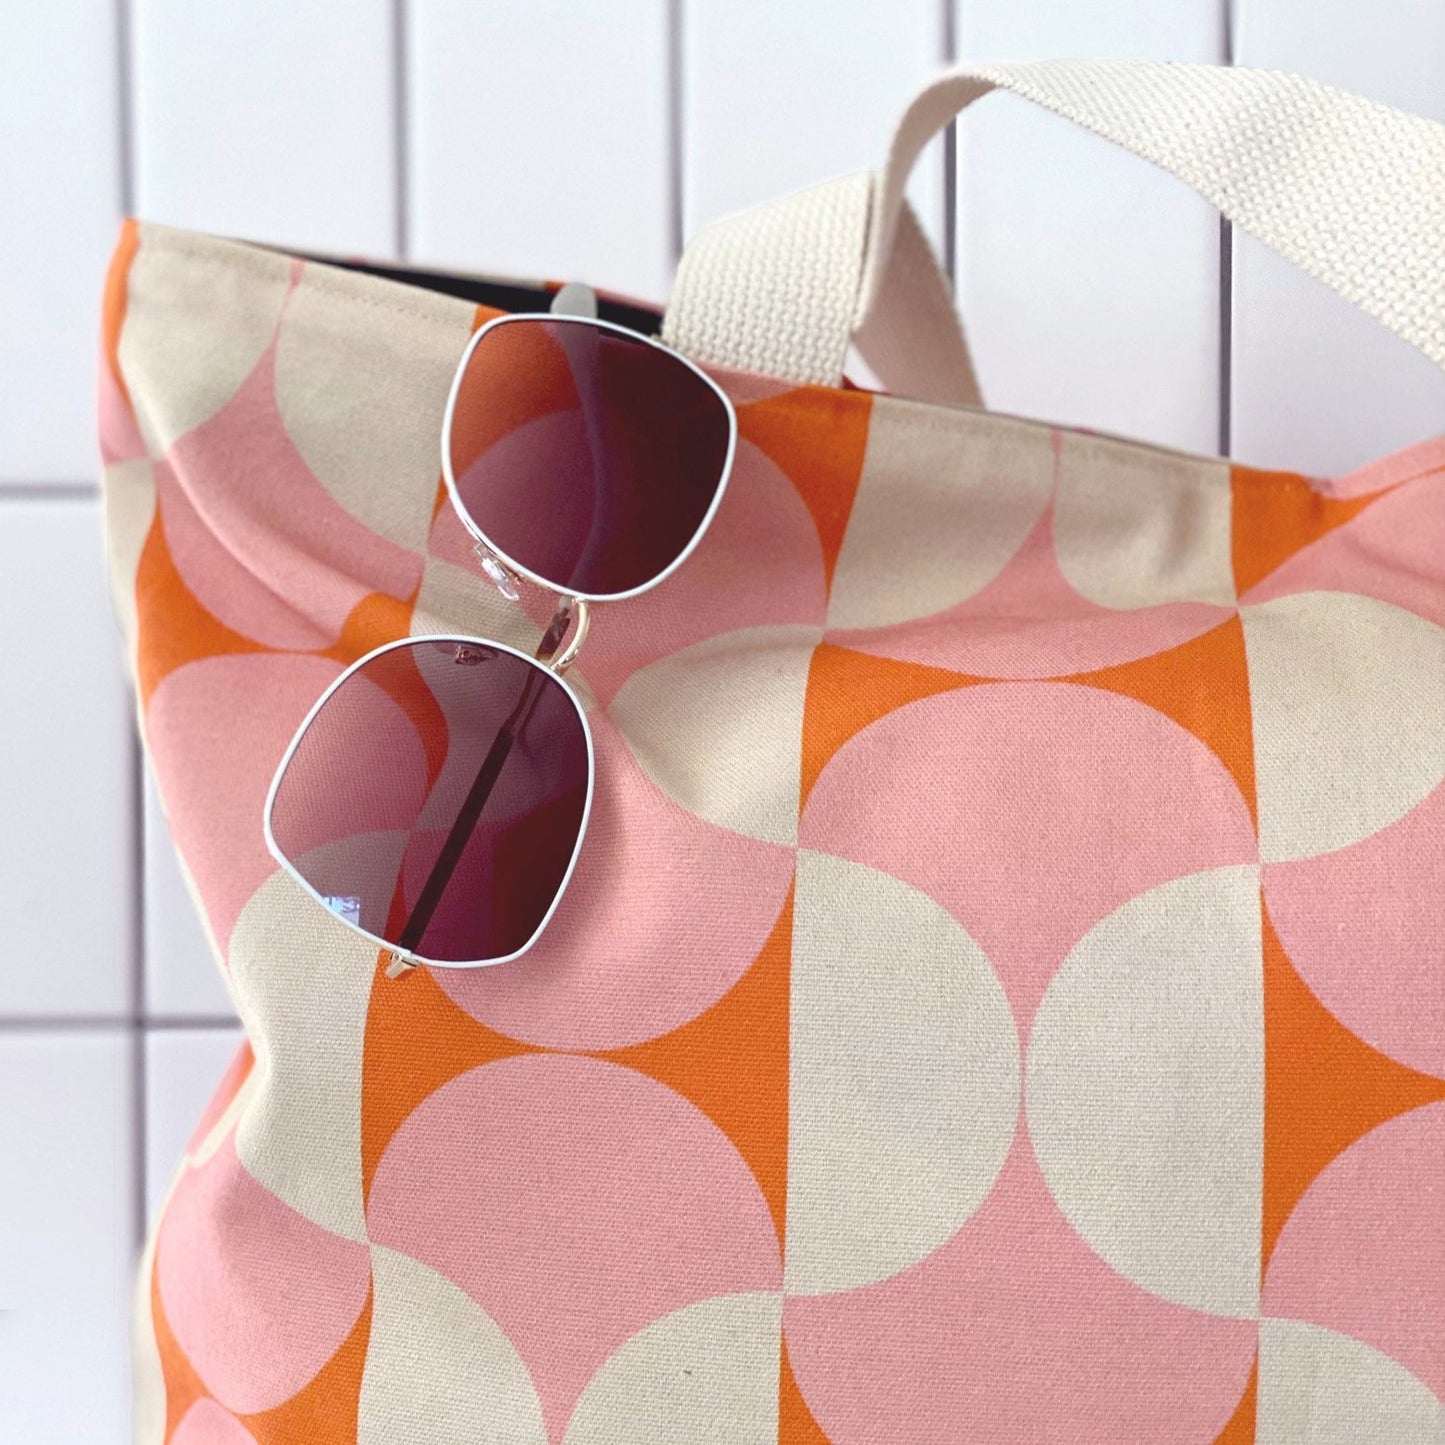 Retro 60's style pink and orange geometric print on this oversized canvas tote. Great for beach, market, travel, and every day.